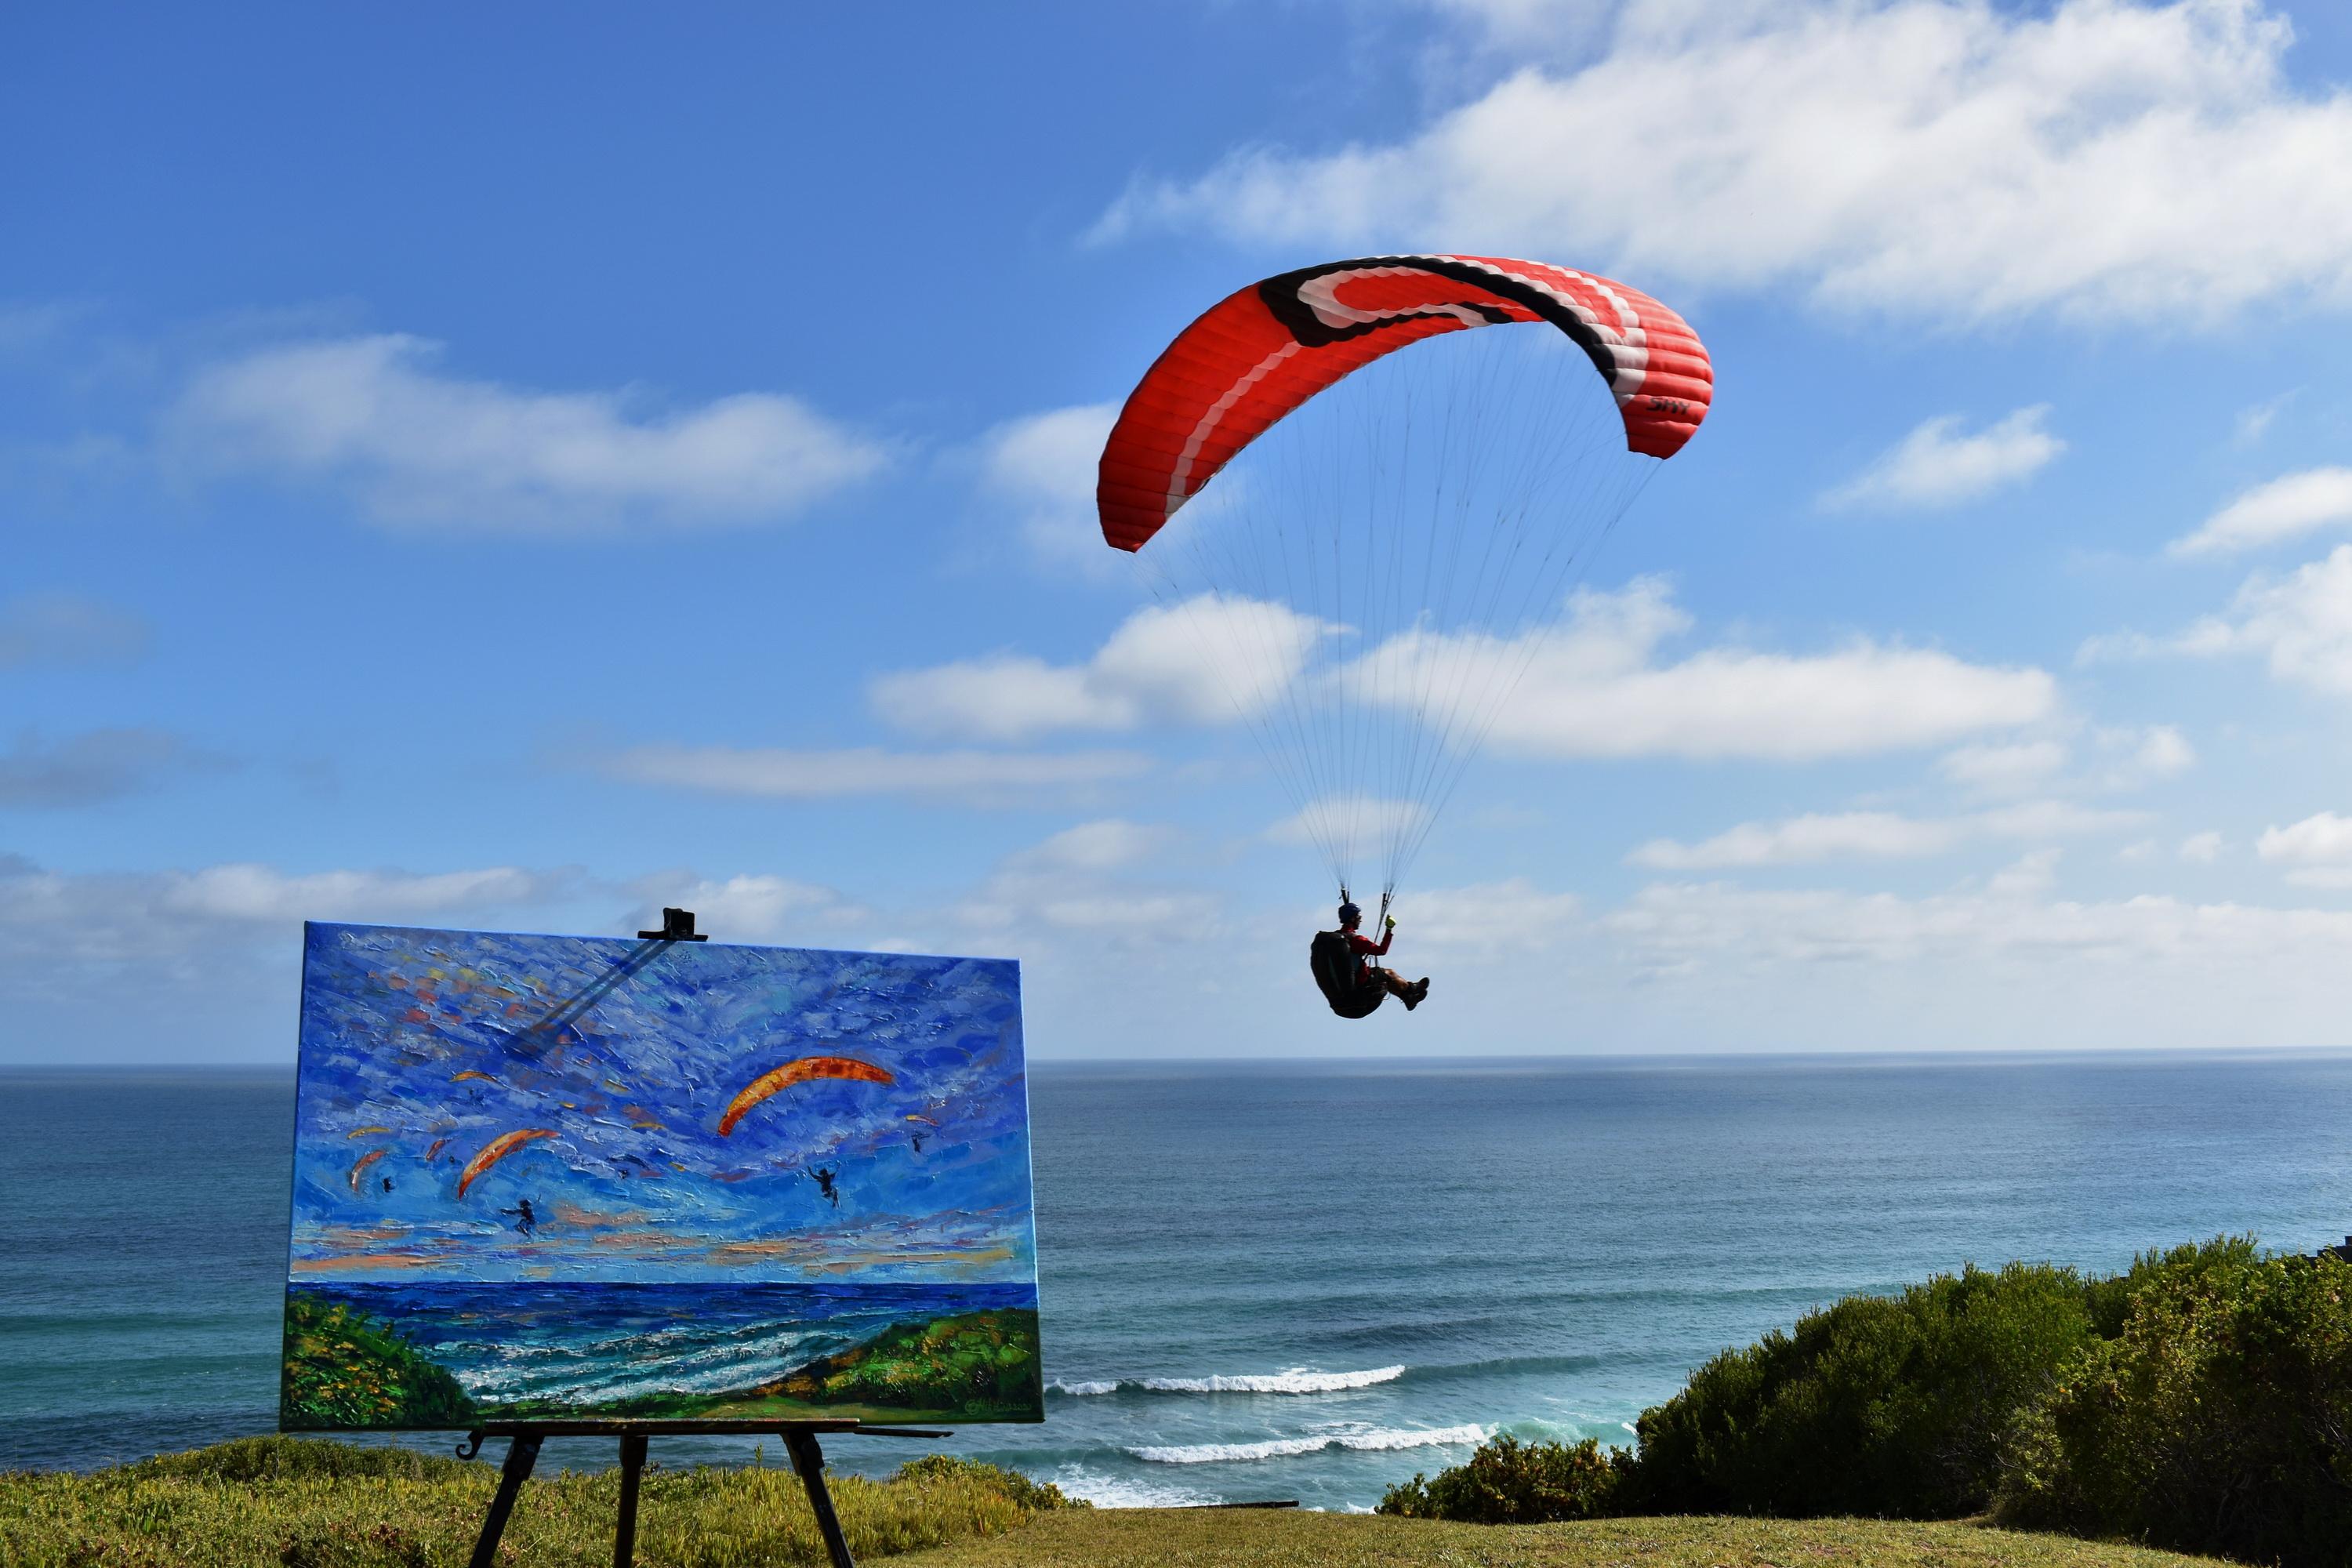 Paraglidiing Fly above the Ocean - Impressionist Painting by Olga Nikitina